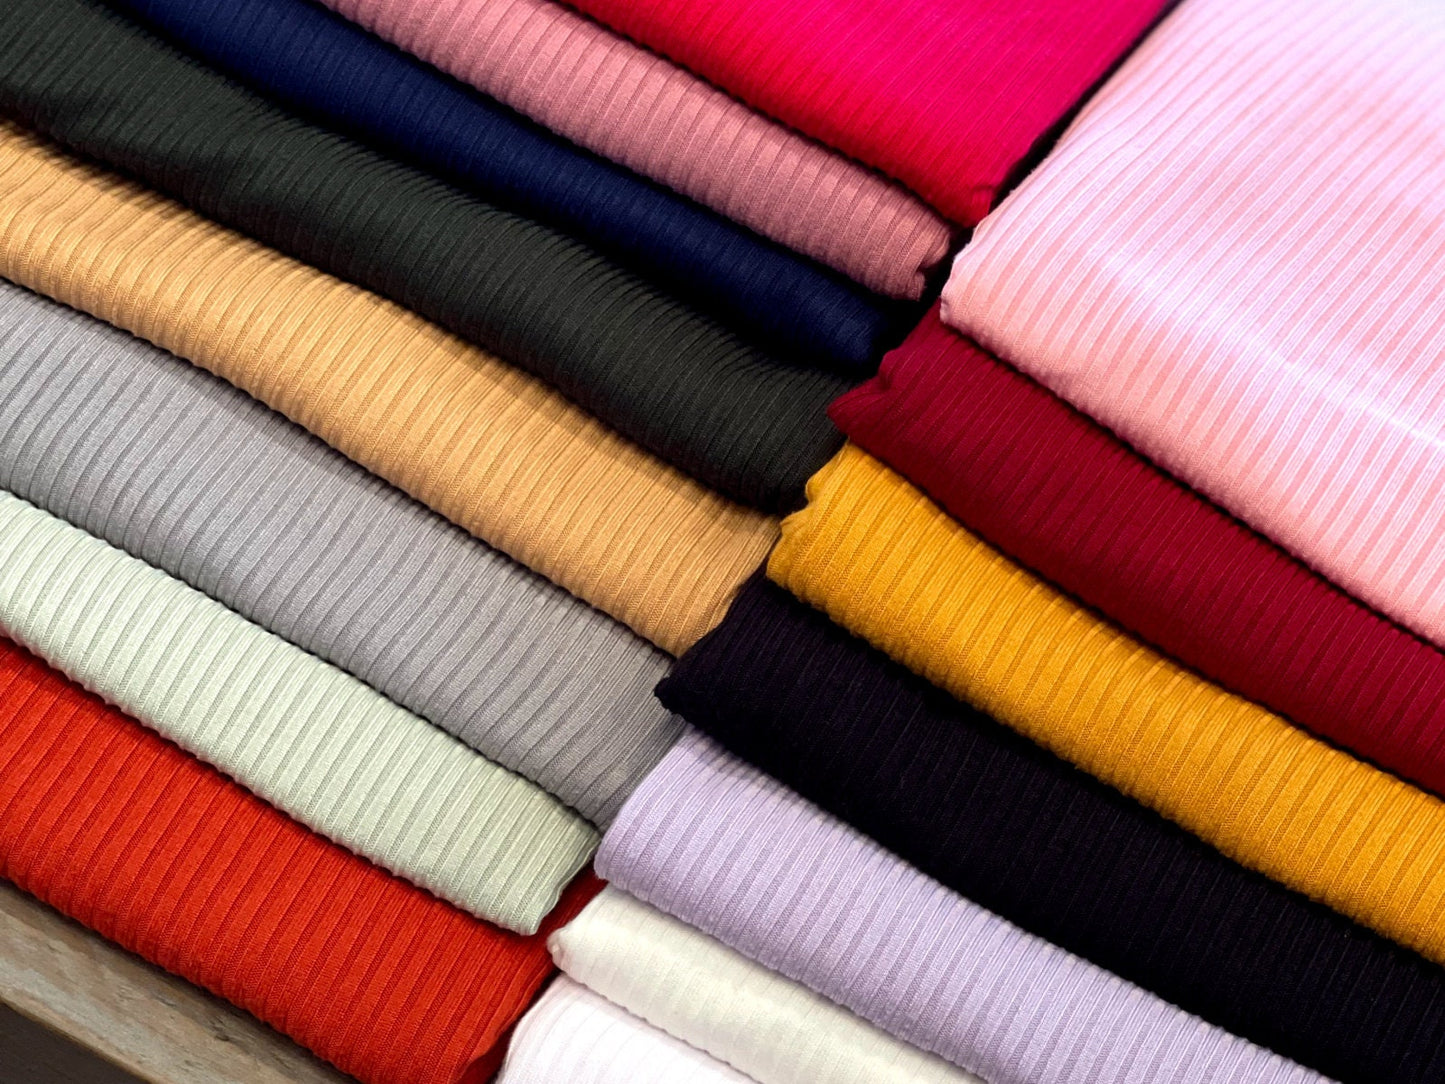 Light pink Rib Knit Fabric by the Yard Ribbed Jersey Stretchy Soft Polyester Stretch Fabric 1 Yard